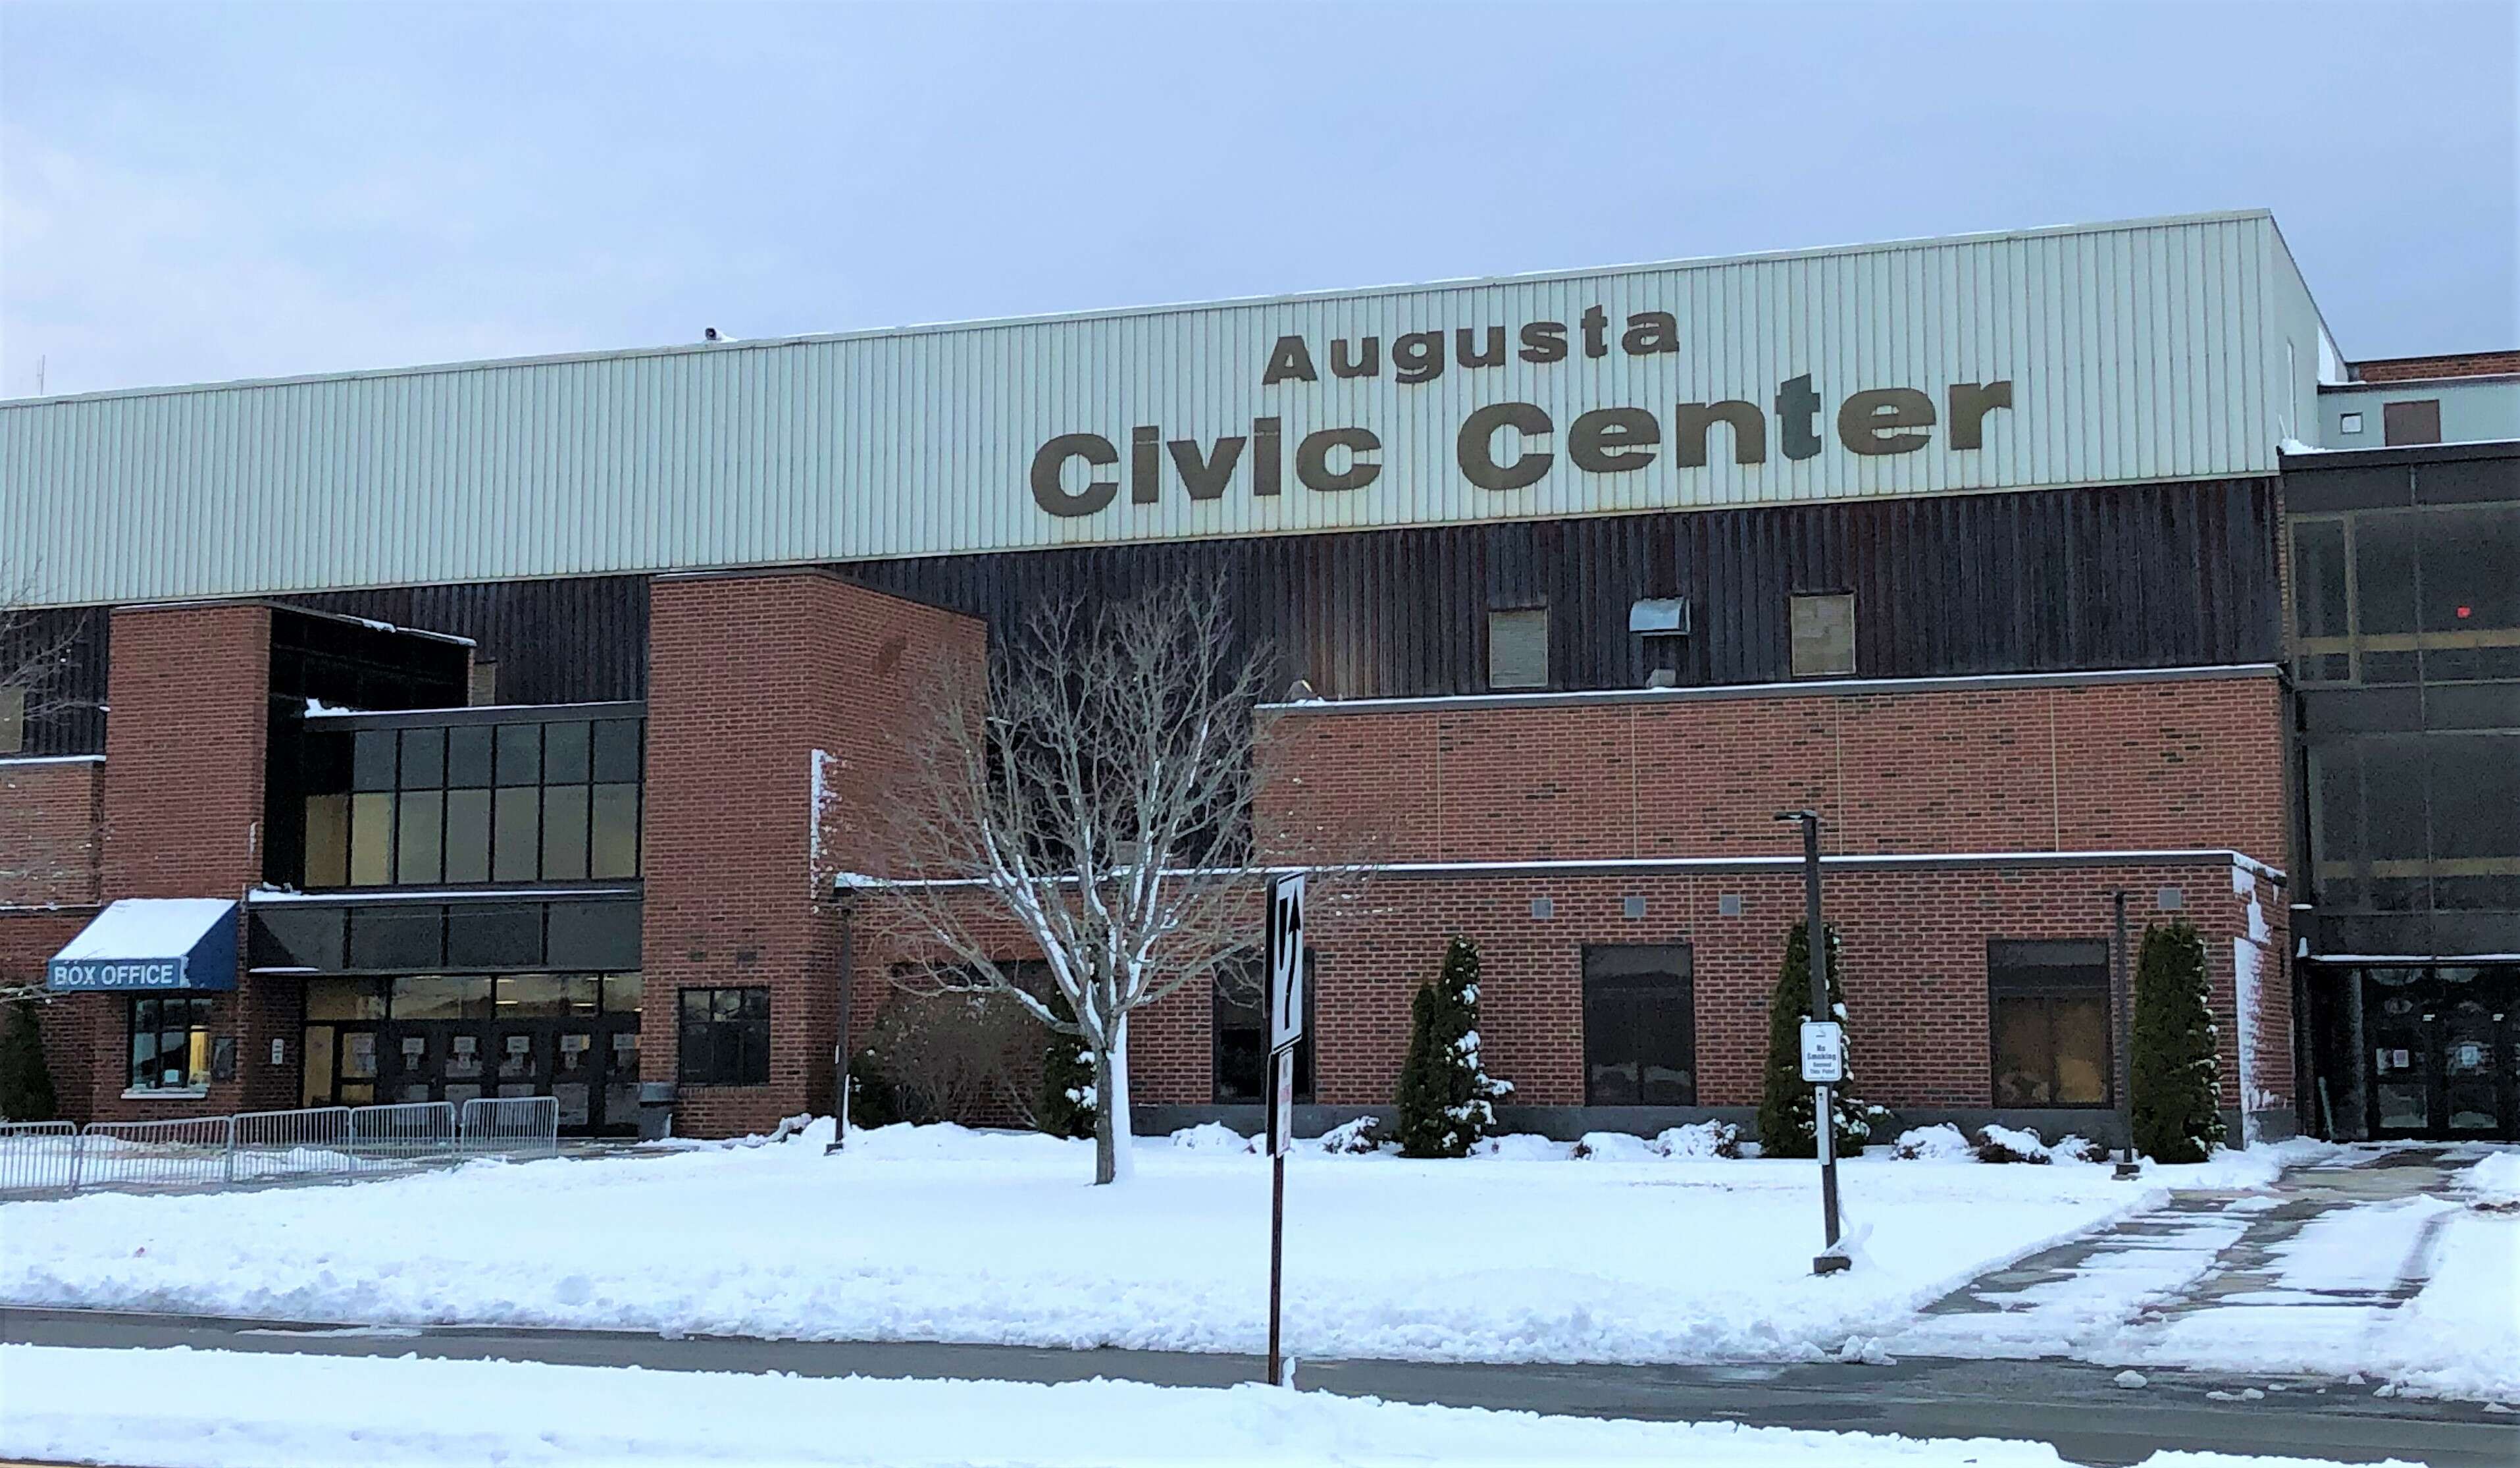 a large brick building with snow in the front and Augusta Civic Center in large letters near the roof